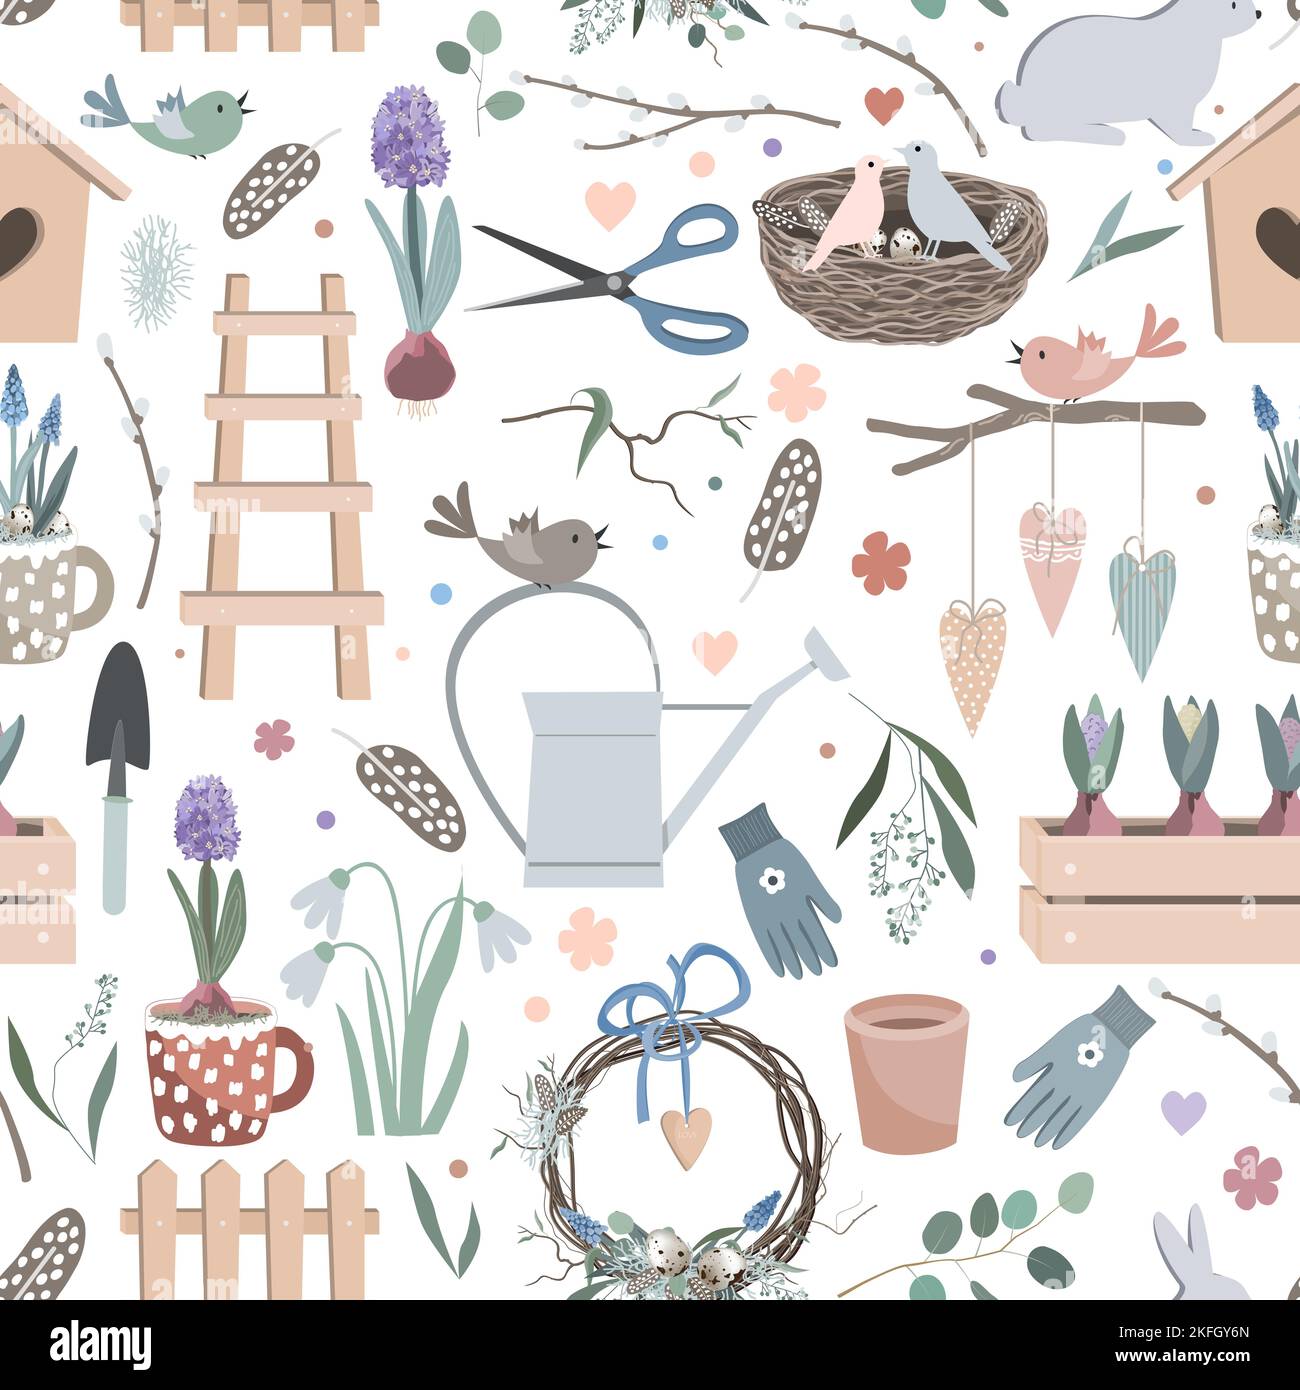 Gardening tools pattern, seamless Spring vector background. Cute hand drawn birds, nest, watering pot, seedling, gardening gloves and flowers. Stock Vector